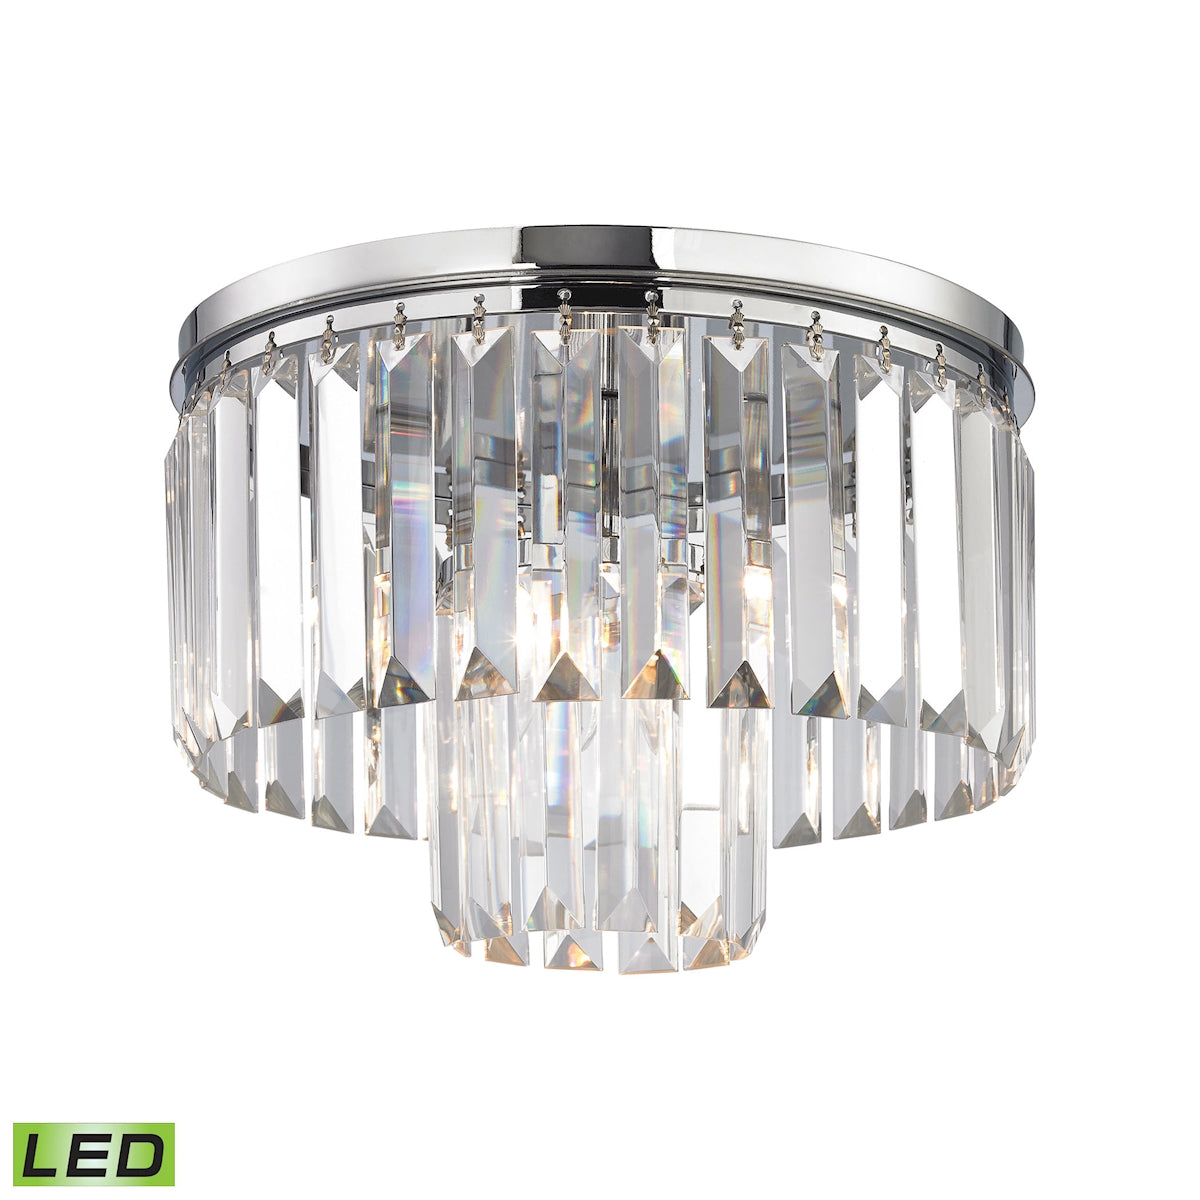 ELK Lighting 15213/1-LED Palacial 1-Light Flush Mount in Polished Chrome with Clear Crystal - Includes LED Bulb